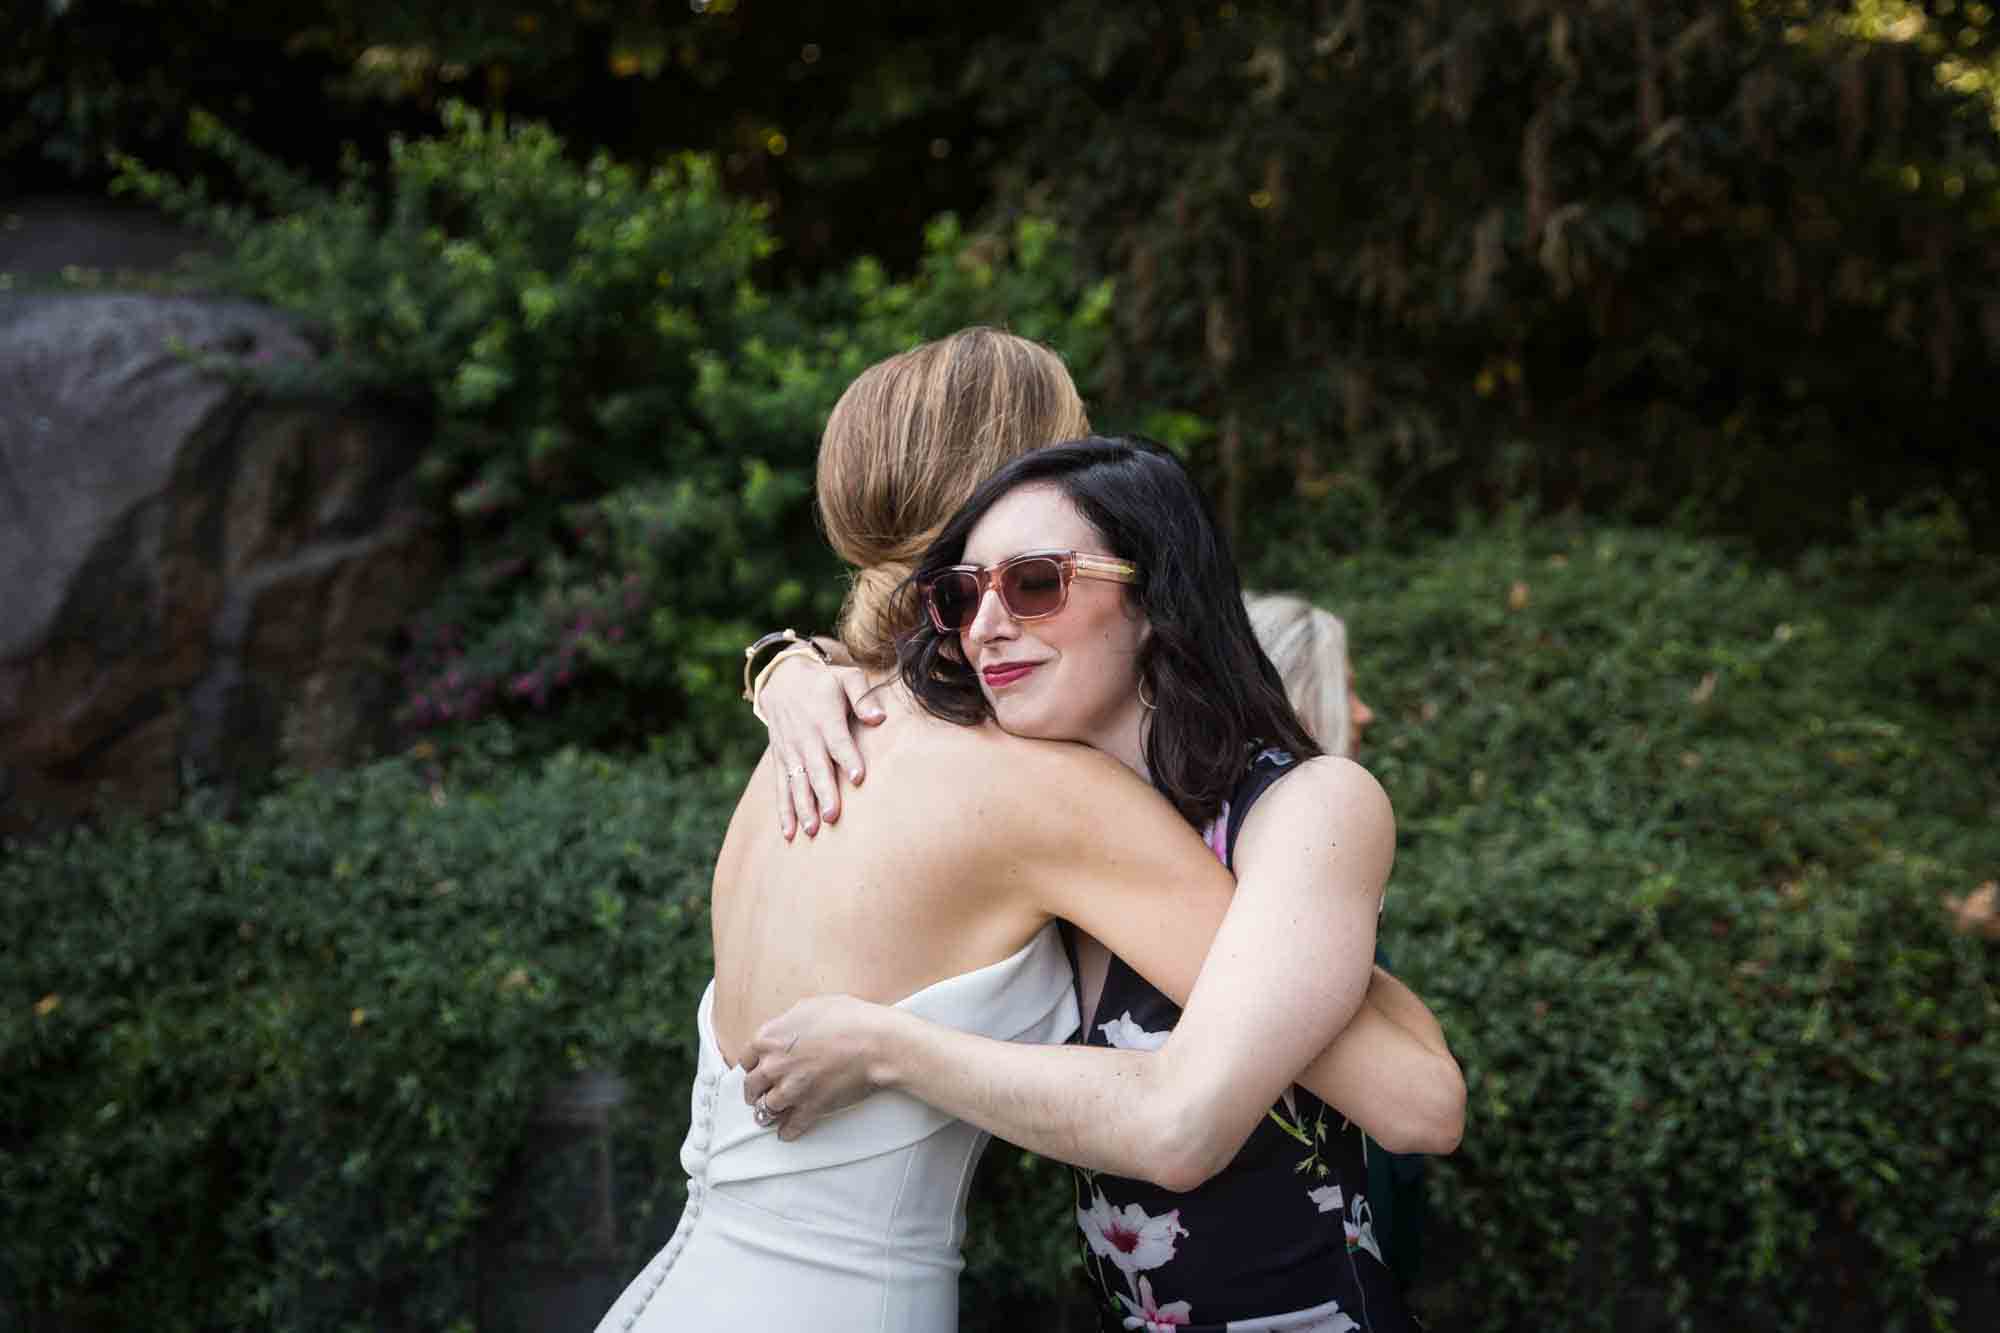 Bride hugging female guest wearing sunglasses during a Conservatory Garden wedding in Central Park